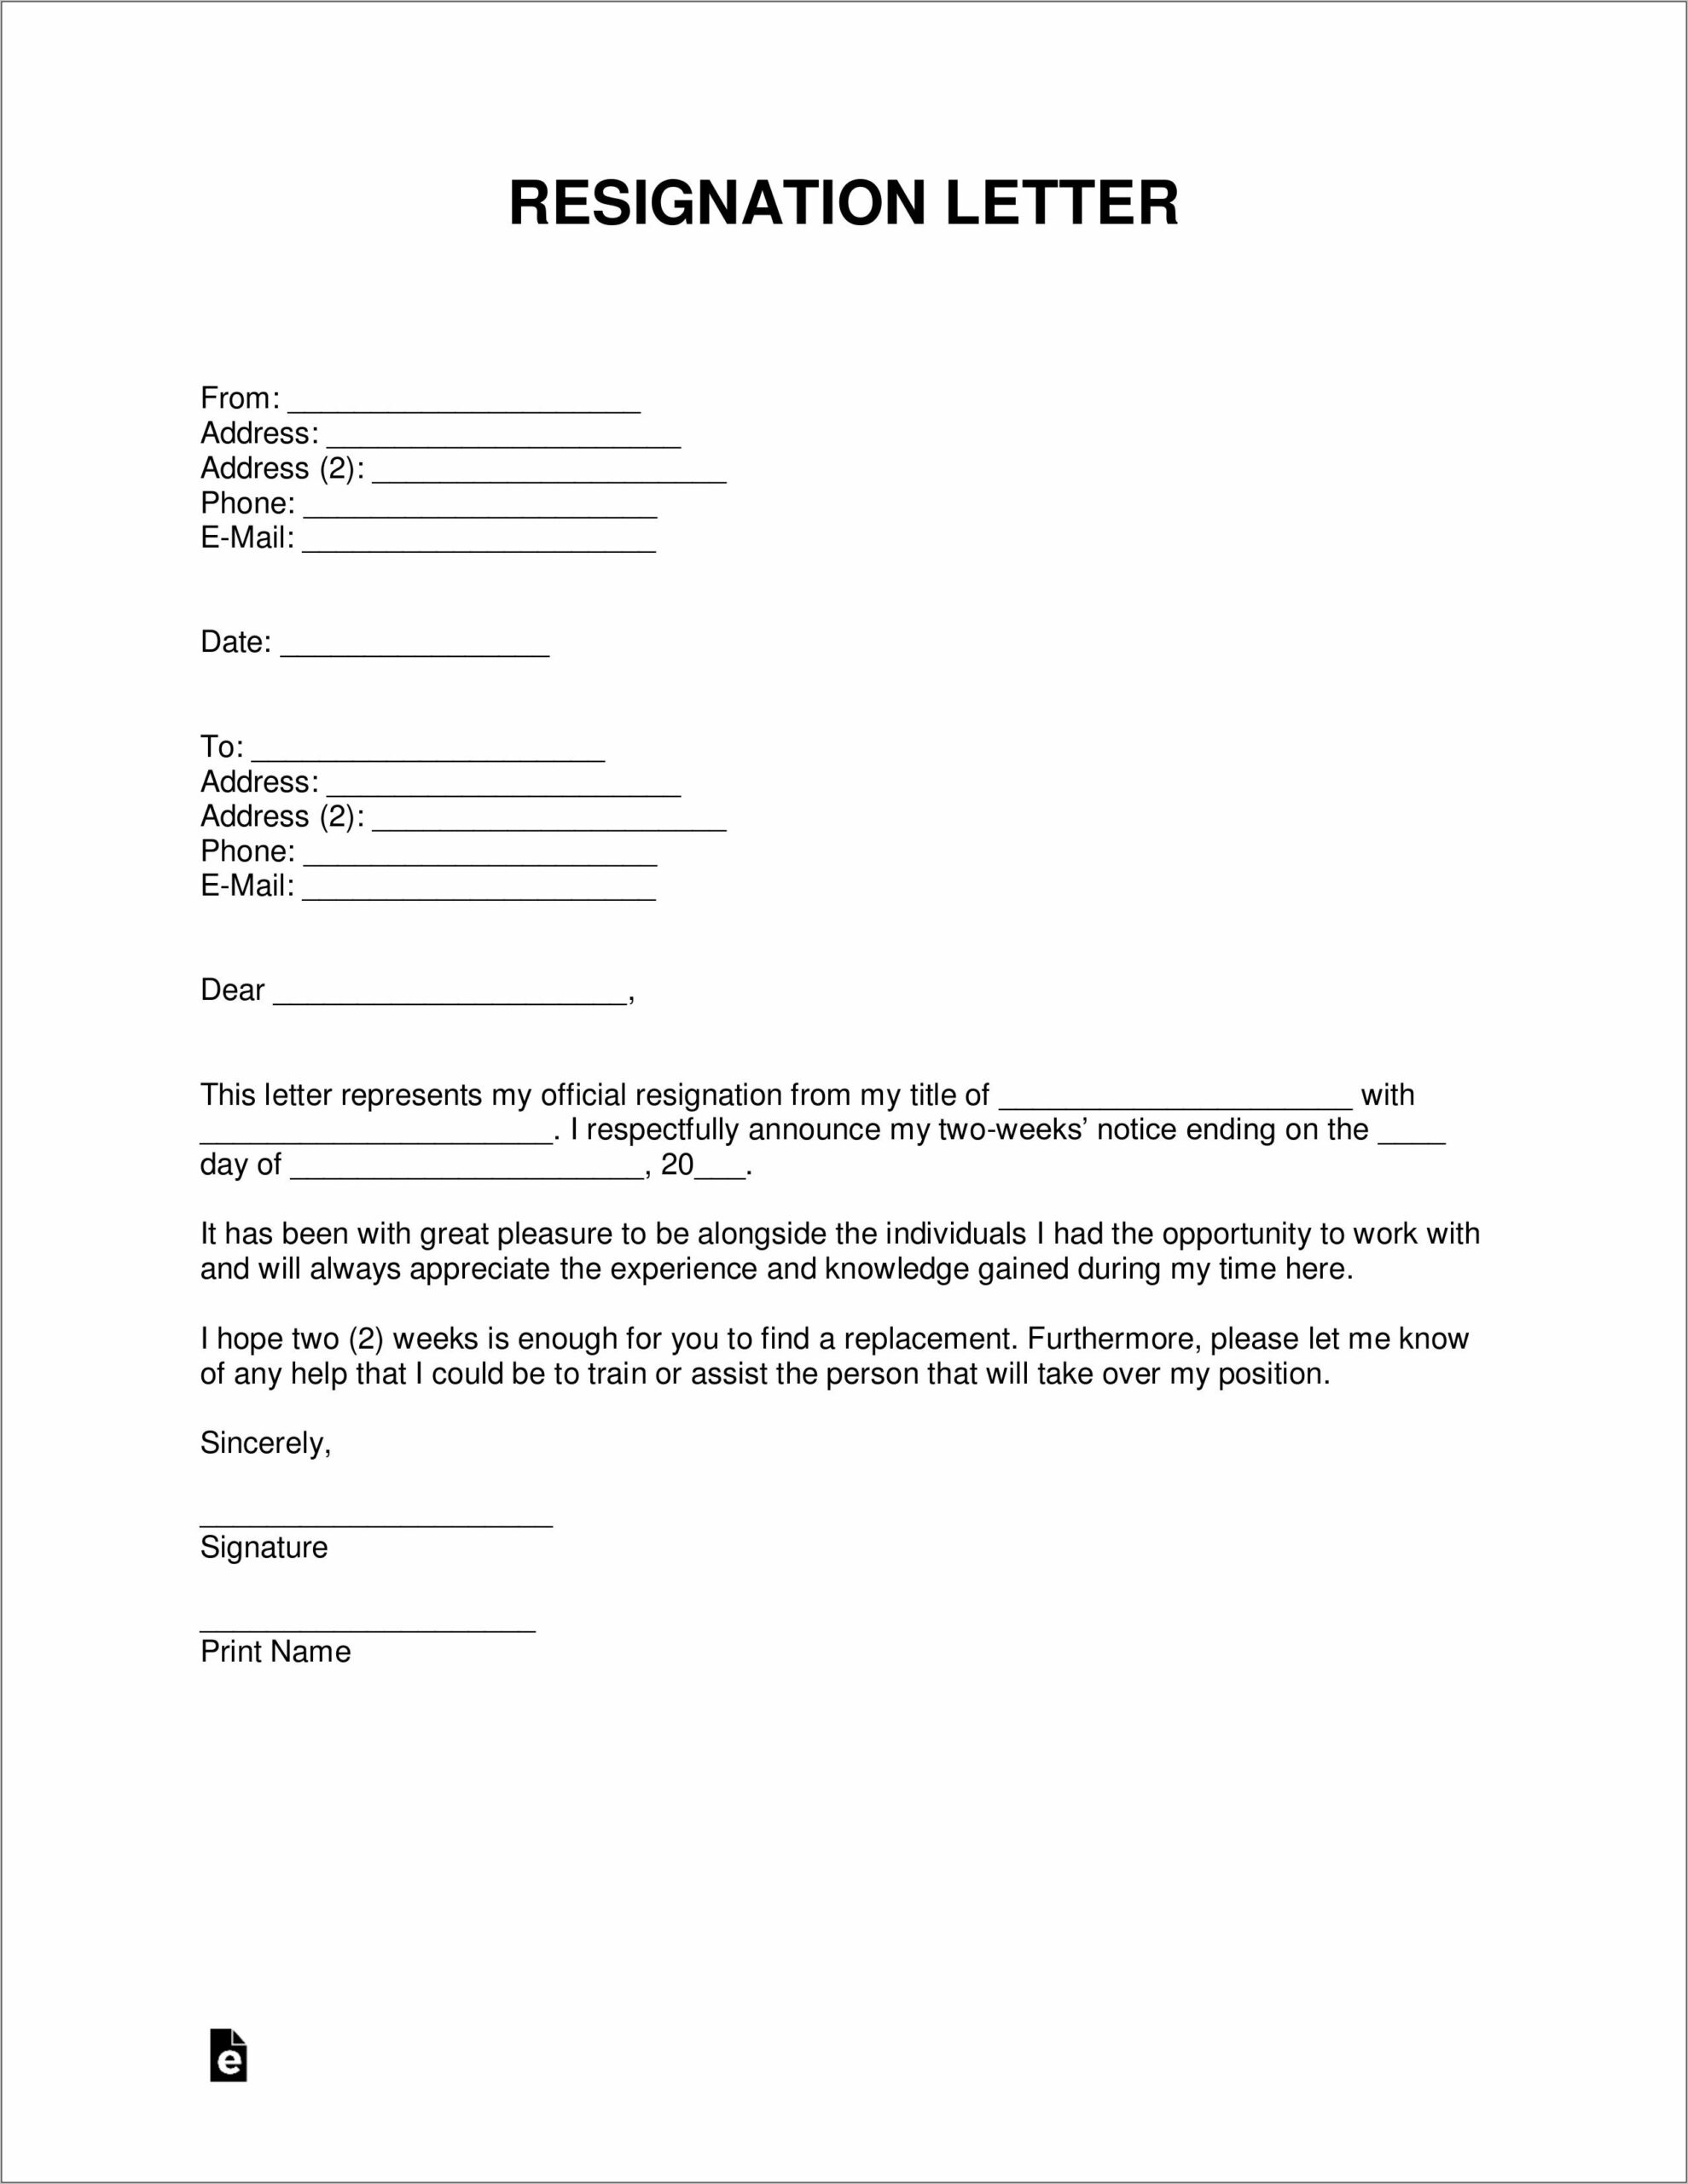 Resignation Letter Template Free